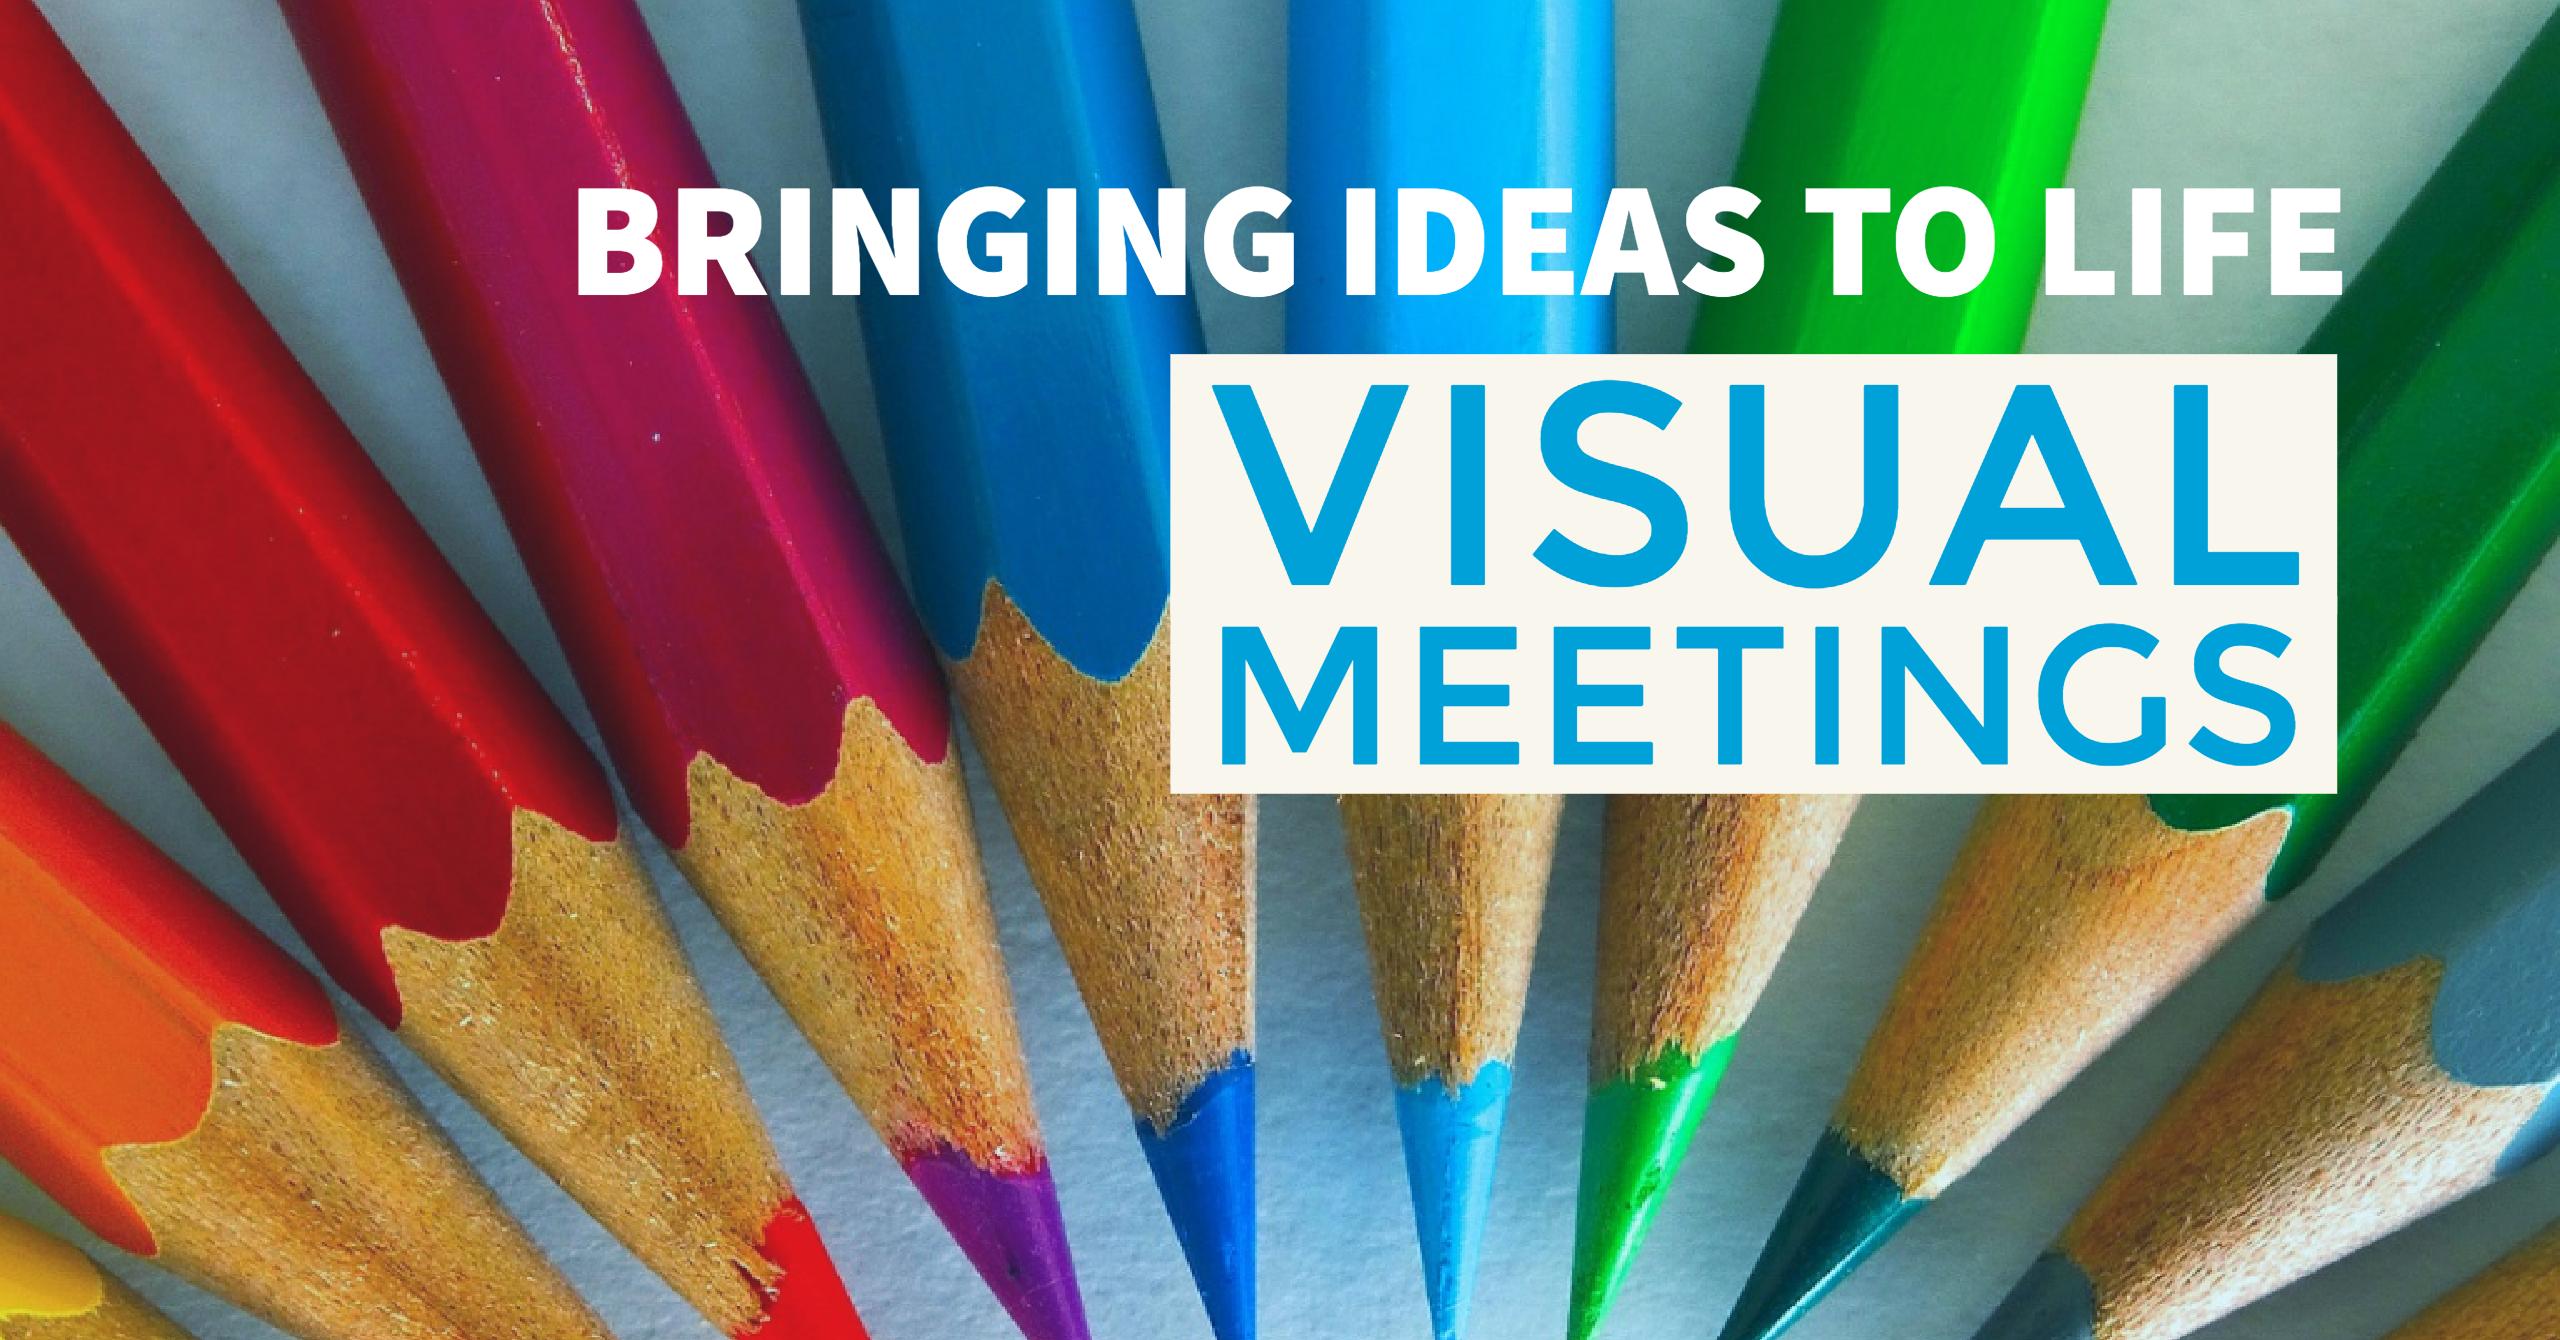 How to use visuals to make meetings more interesting and engaging